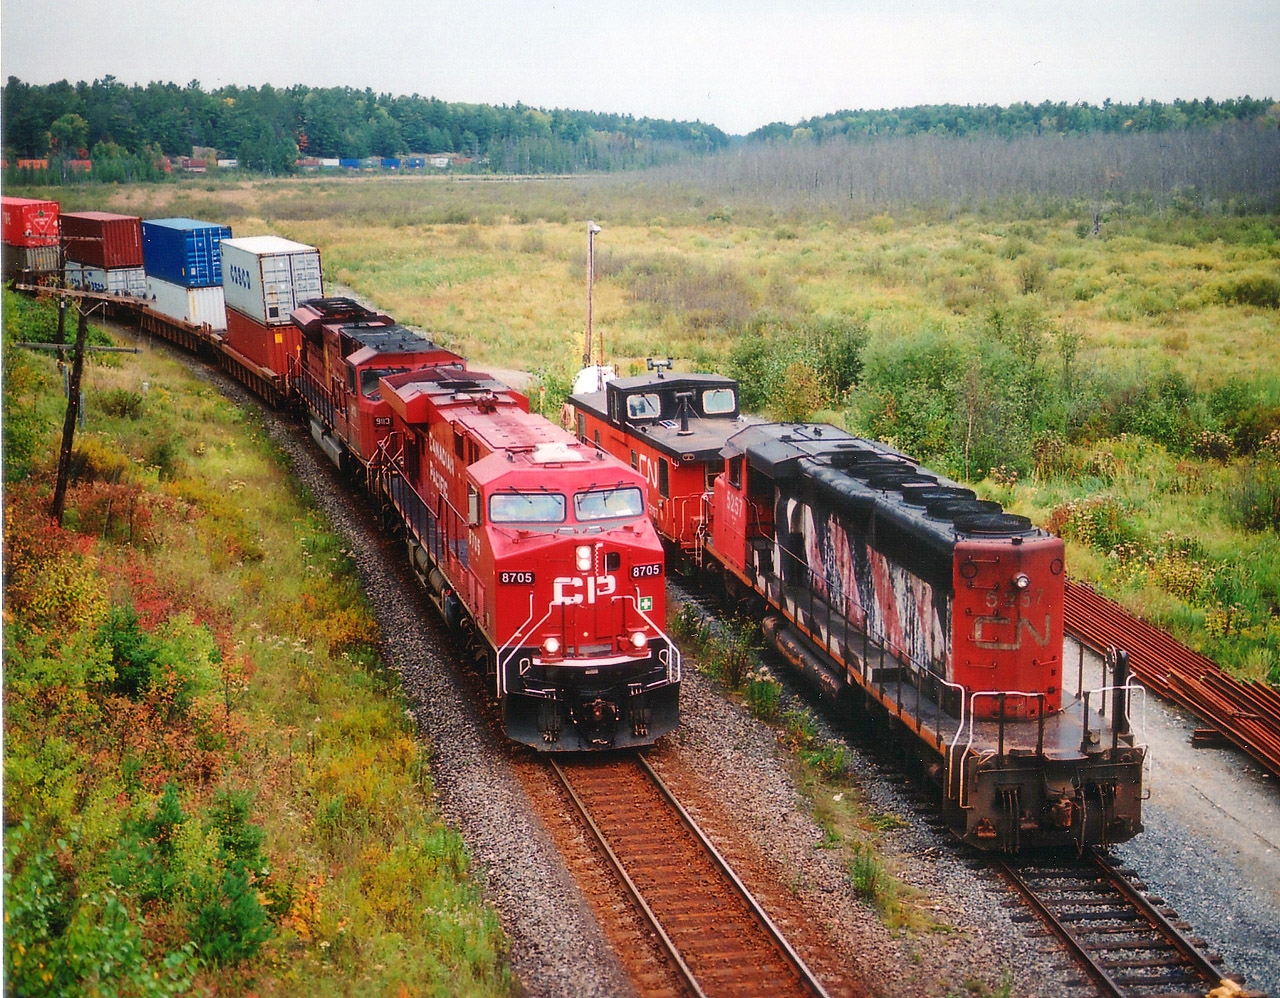 Shared assets in the Shared Asset Zone.  CP #102 with 8705 and 9113 snakes southward past CN 5257 & Van 79707 waiting it out on the MoW siding. View long-lensed from Hwy 69 overpass. Medium format 120- 400 ISO film for anyone interested. From near Parry Sound to just south of Sudbury CN and CP share trackage. CN line is used for southbounds, CP track for northbounds.